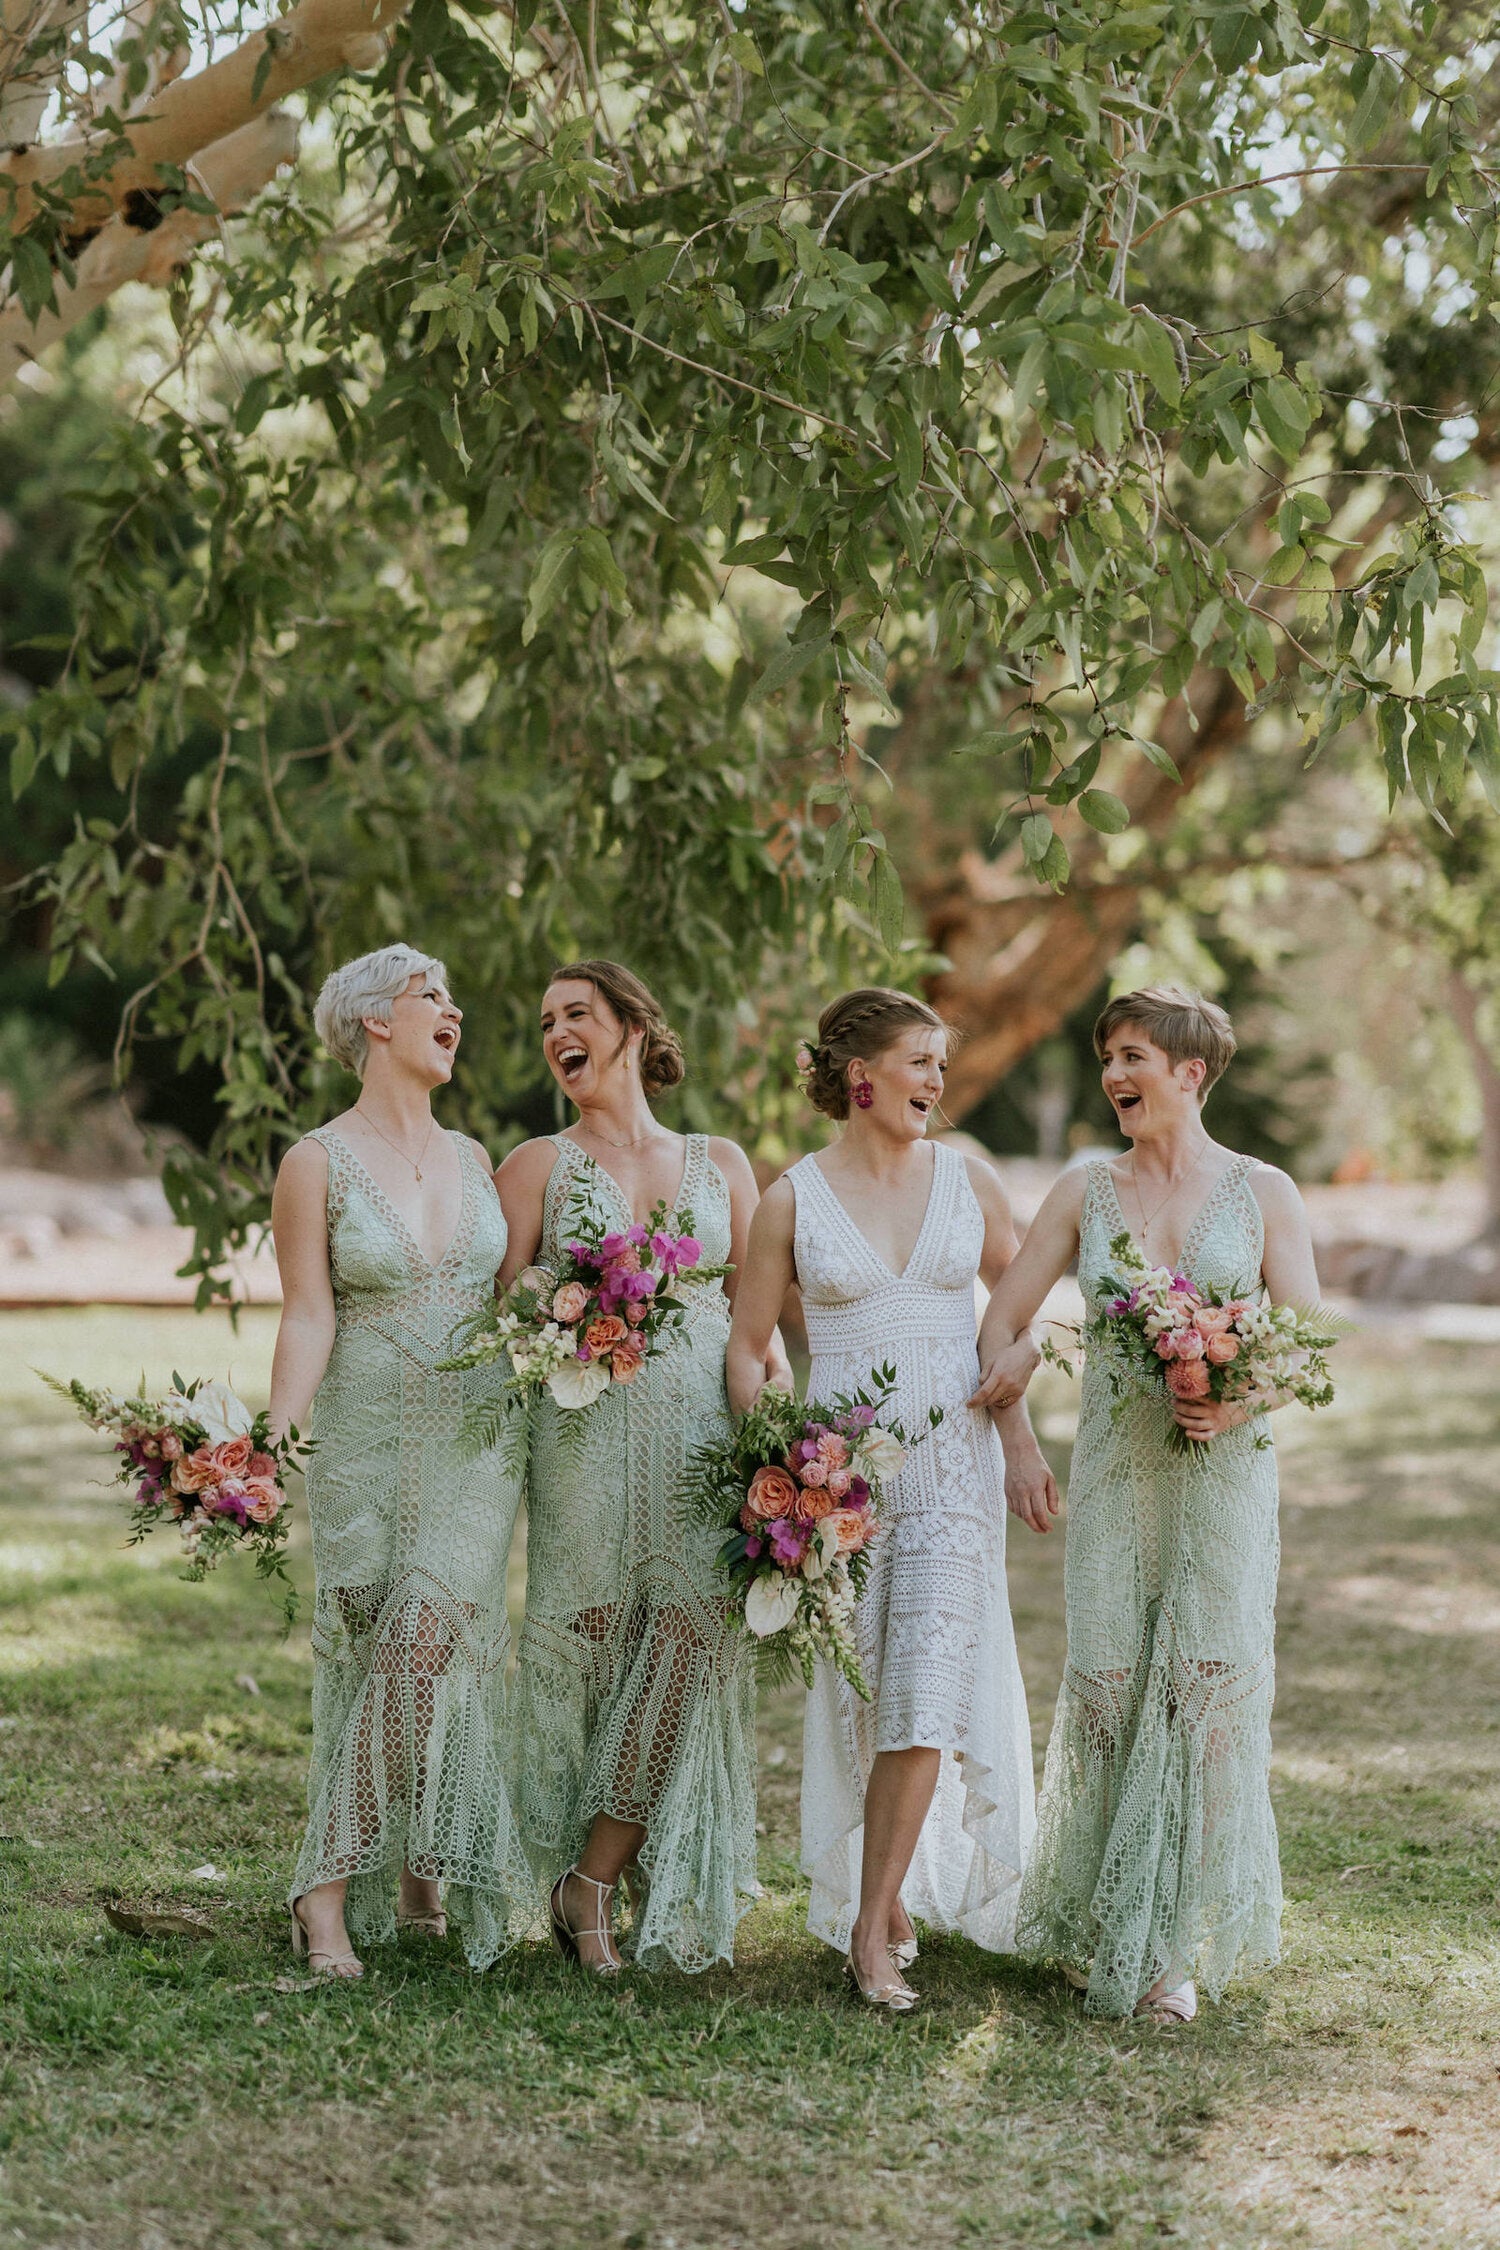 Beija Flor bridesmaids tropical flower bouquets, photo by James Day